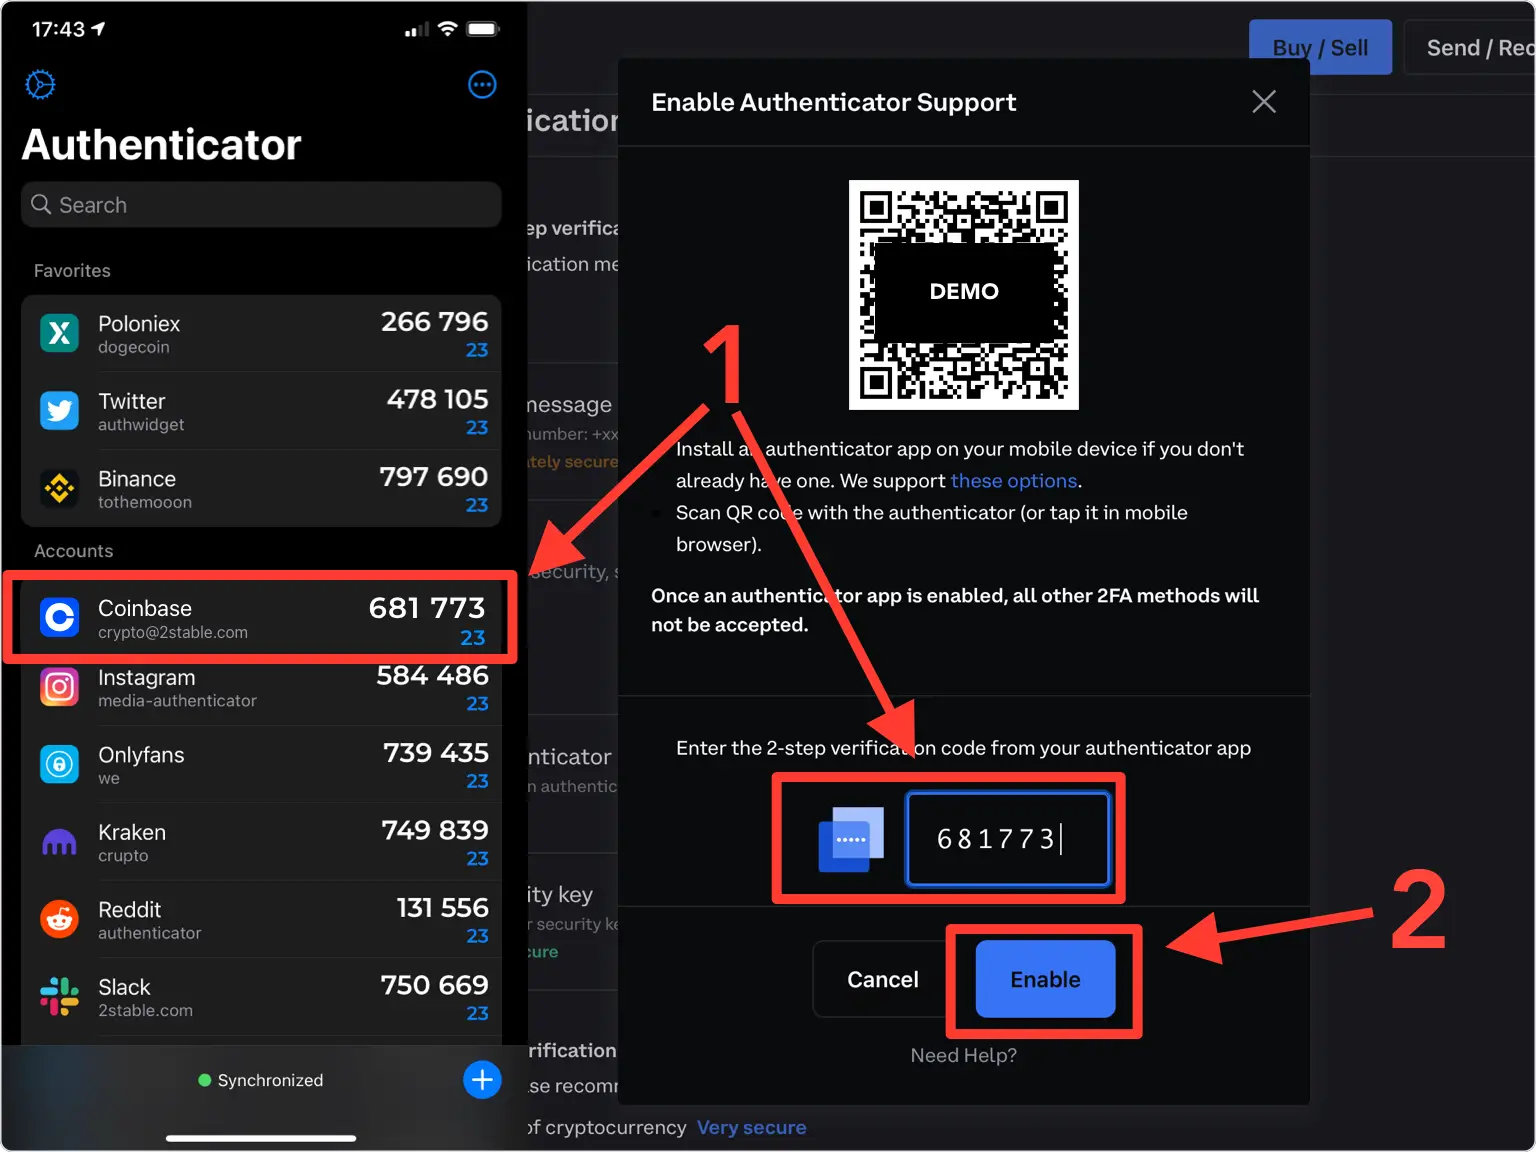 how to add coinbase to authenticator